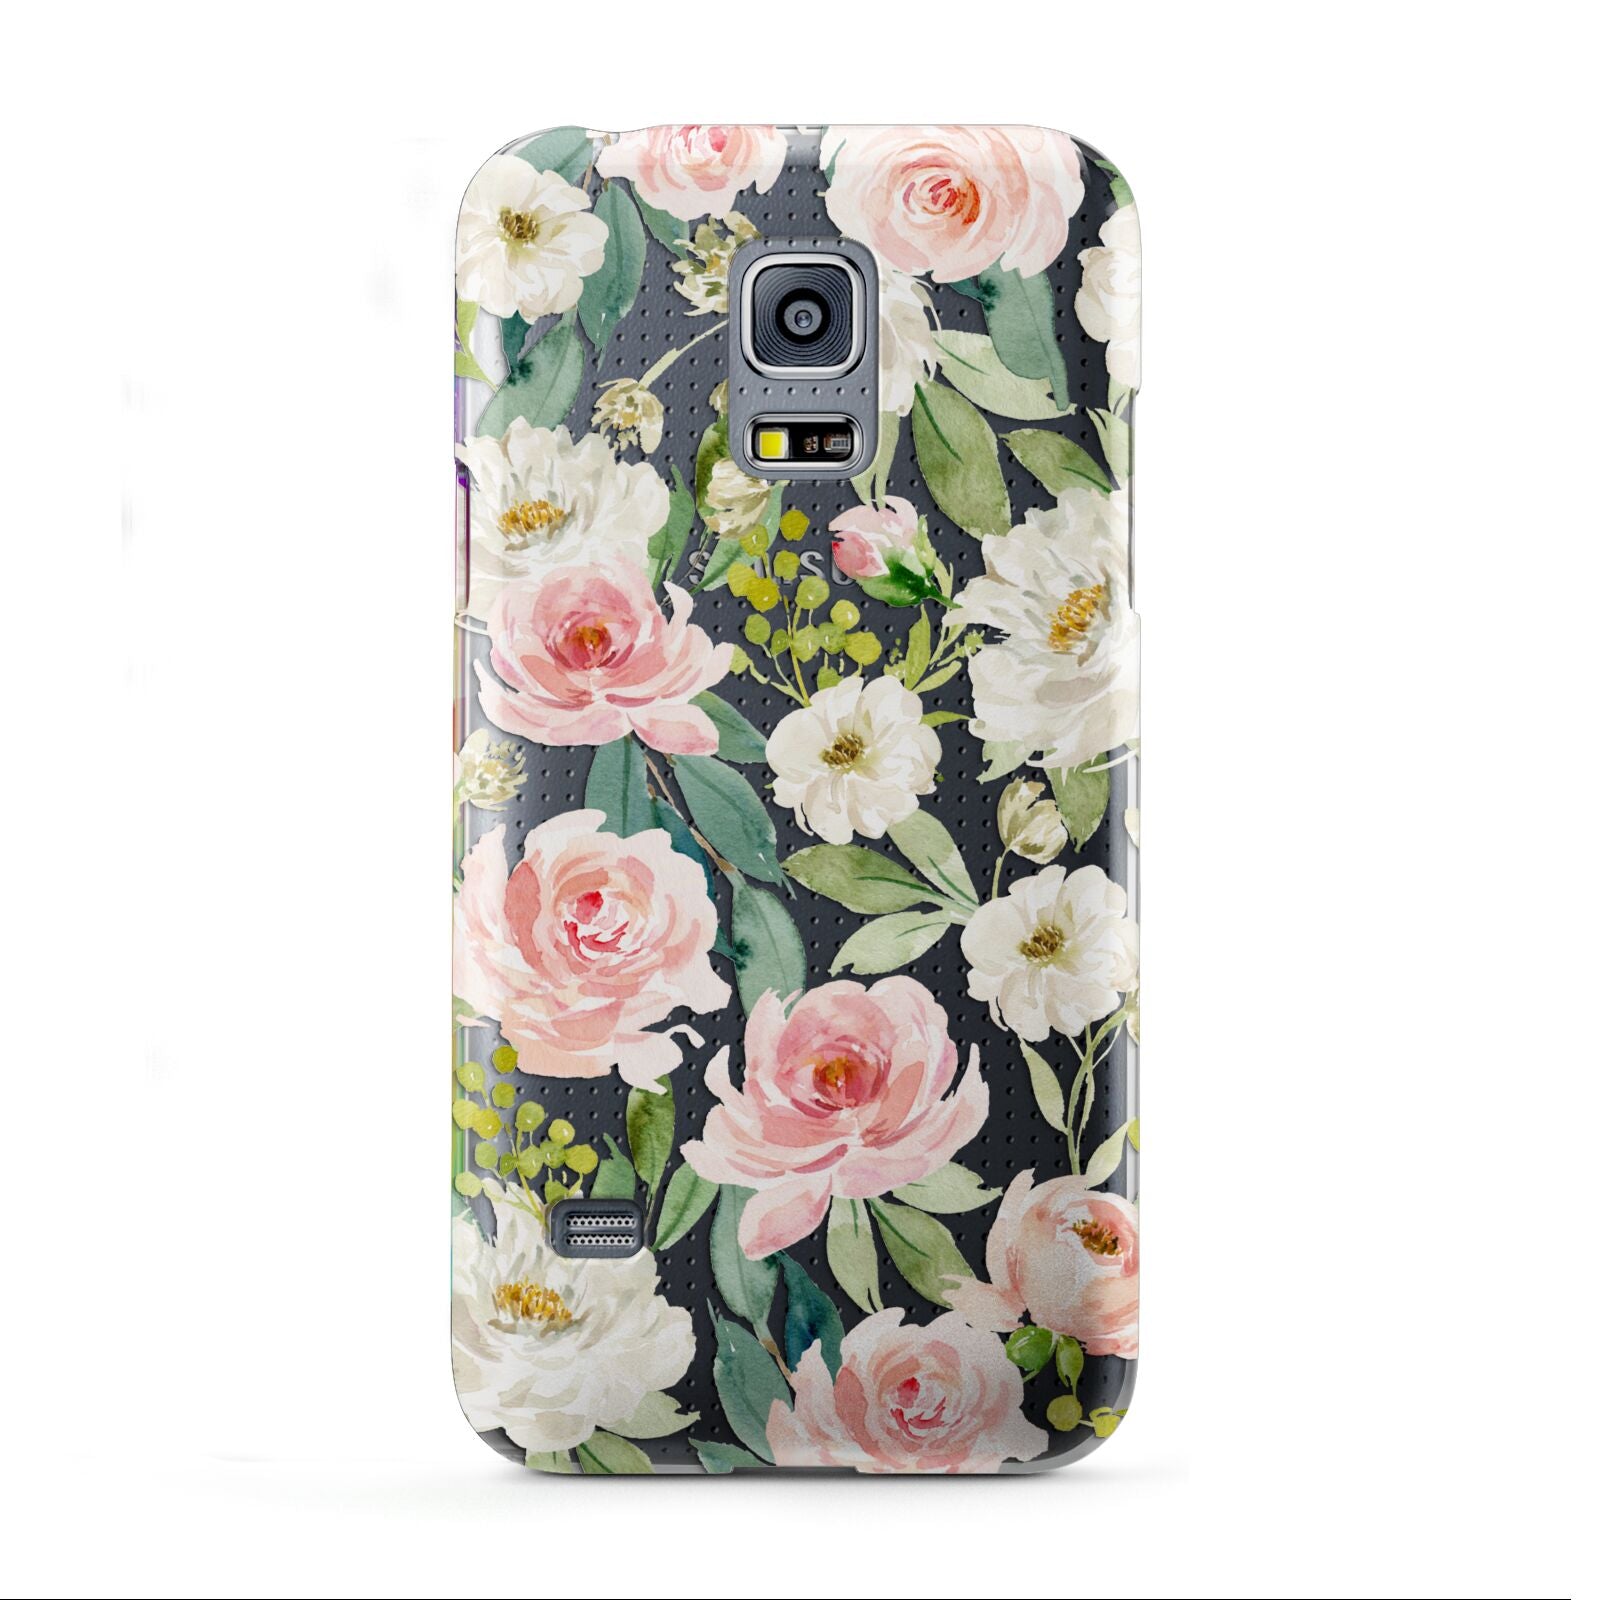 Watercolour Peonies Roses and Foliage Samsung Galaxy S5 Mini Case